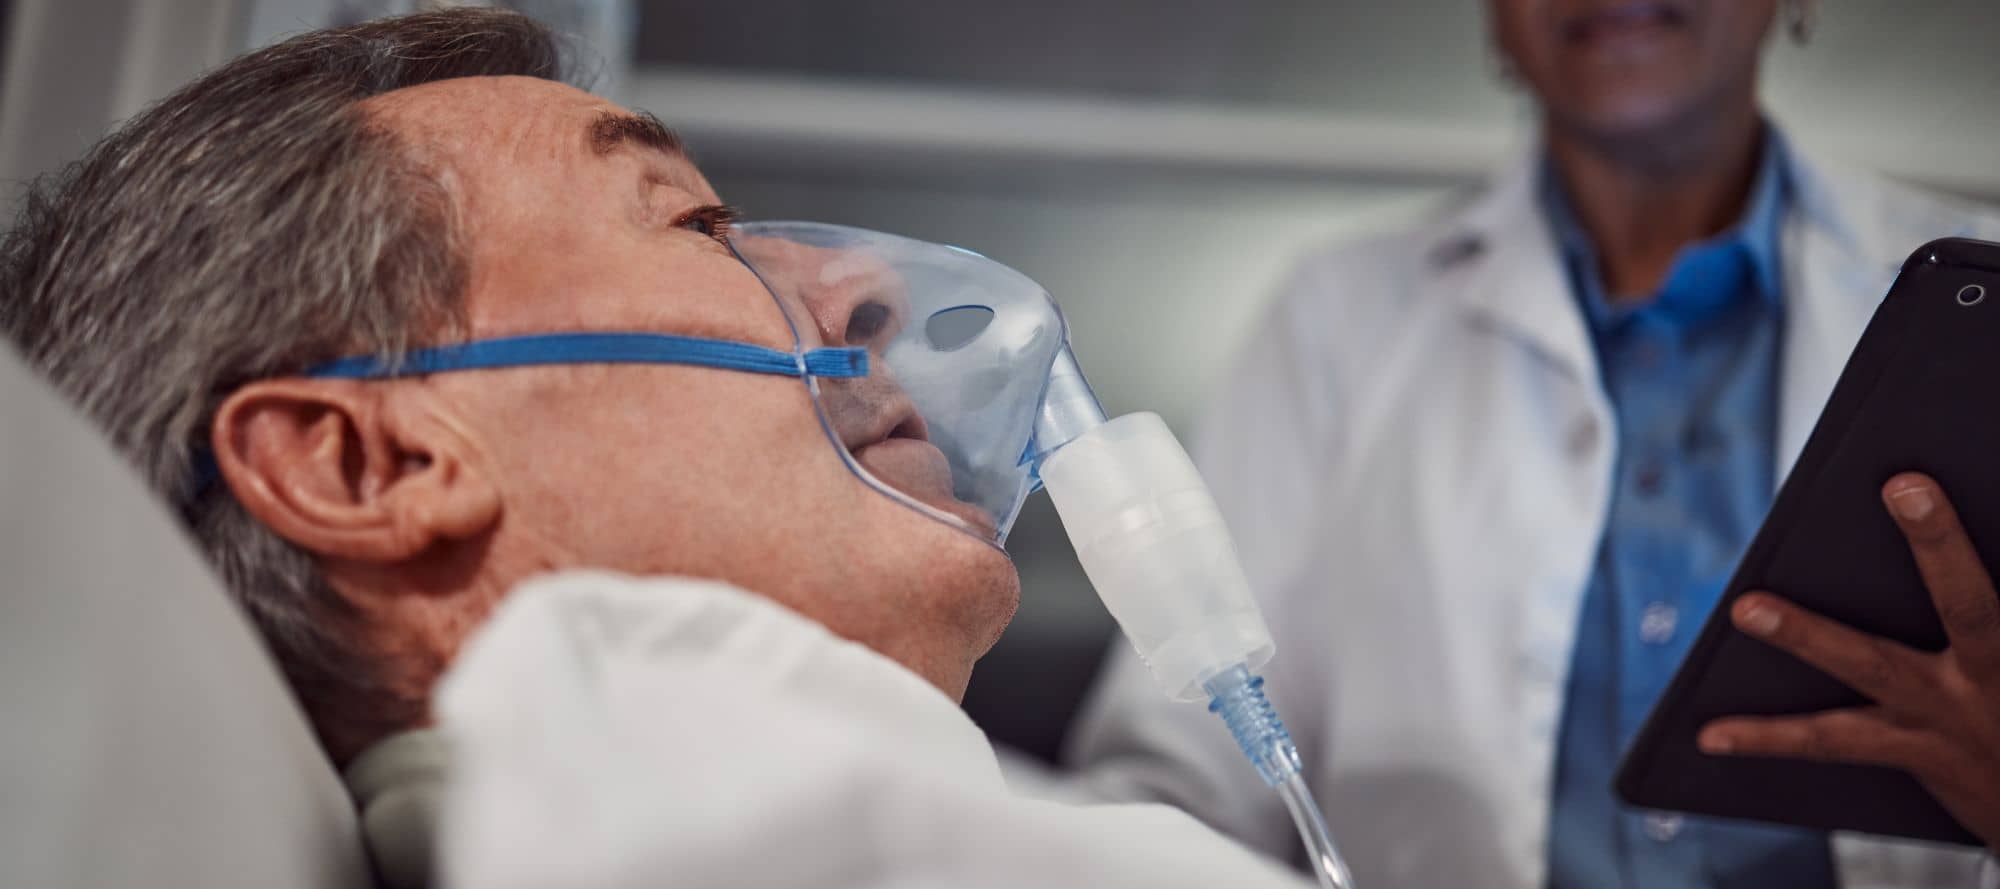 Senior man in the hospital with oxygen mask on speaking with doctor